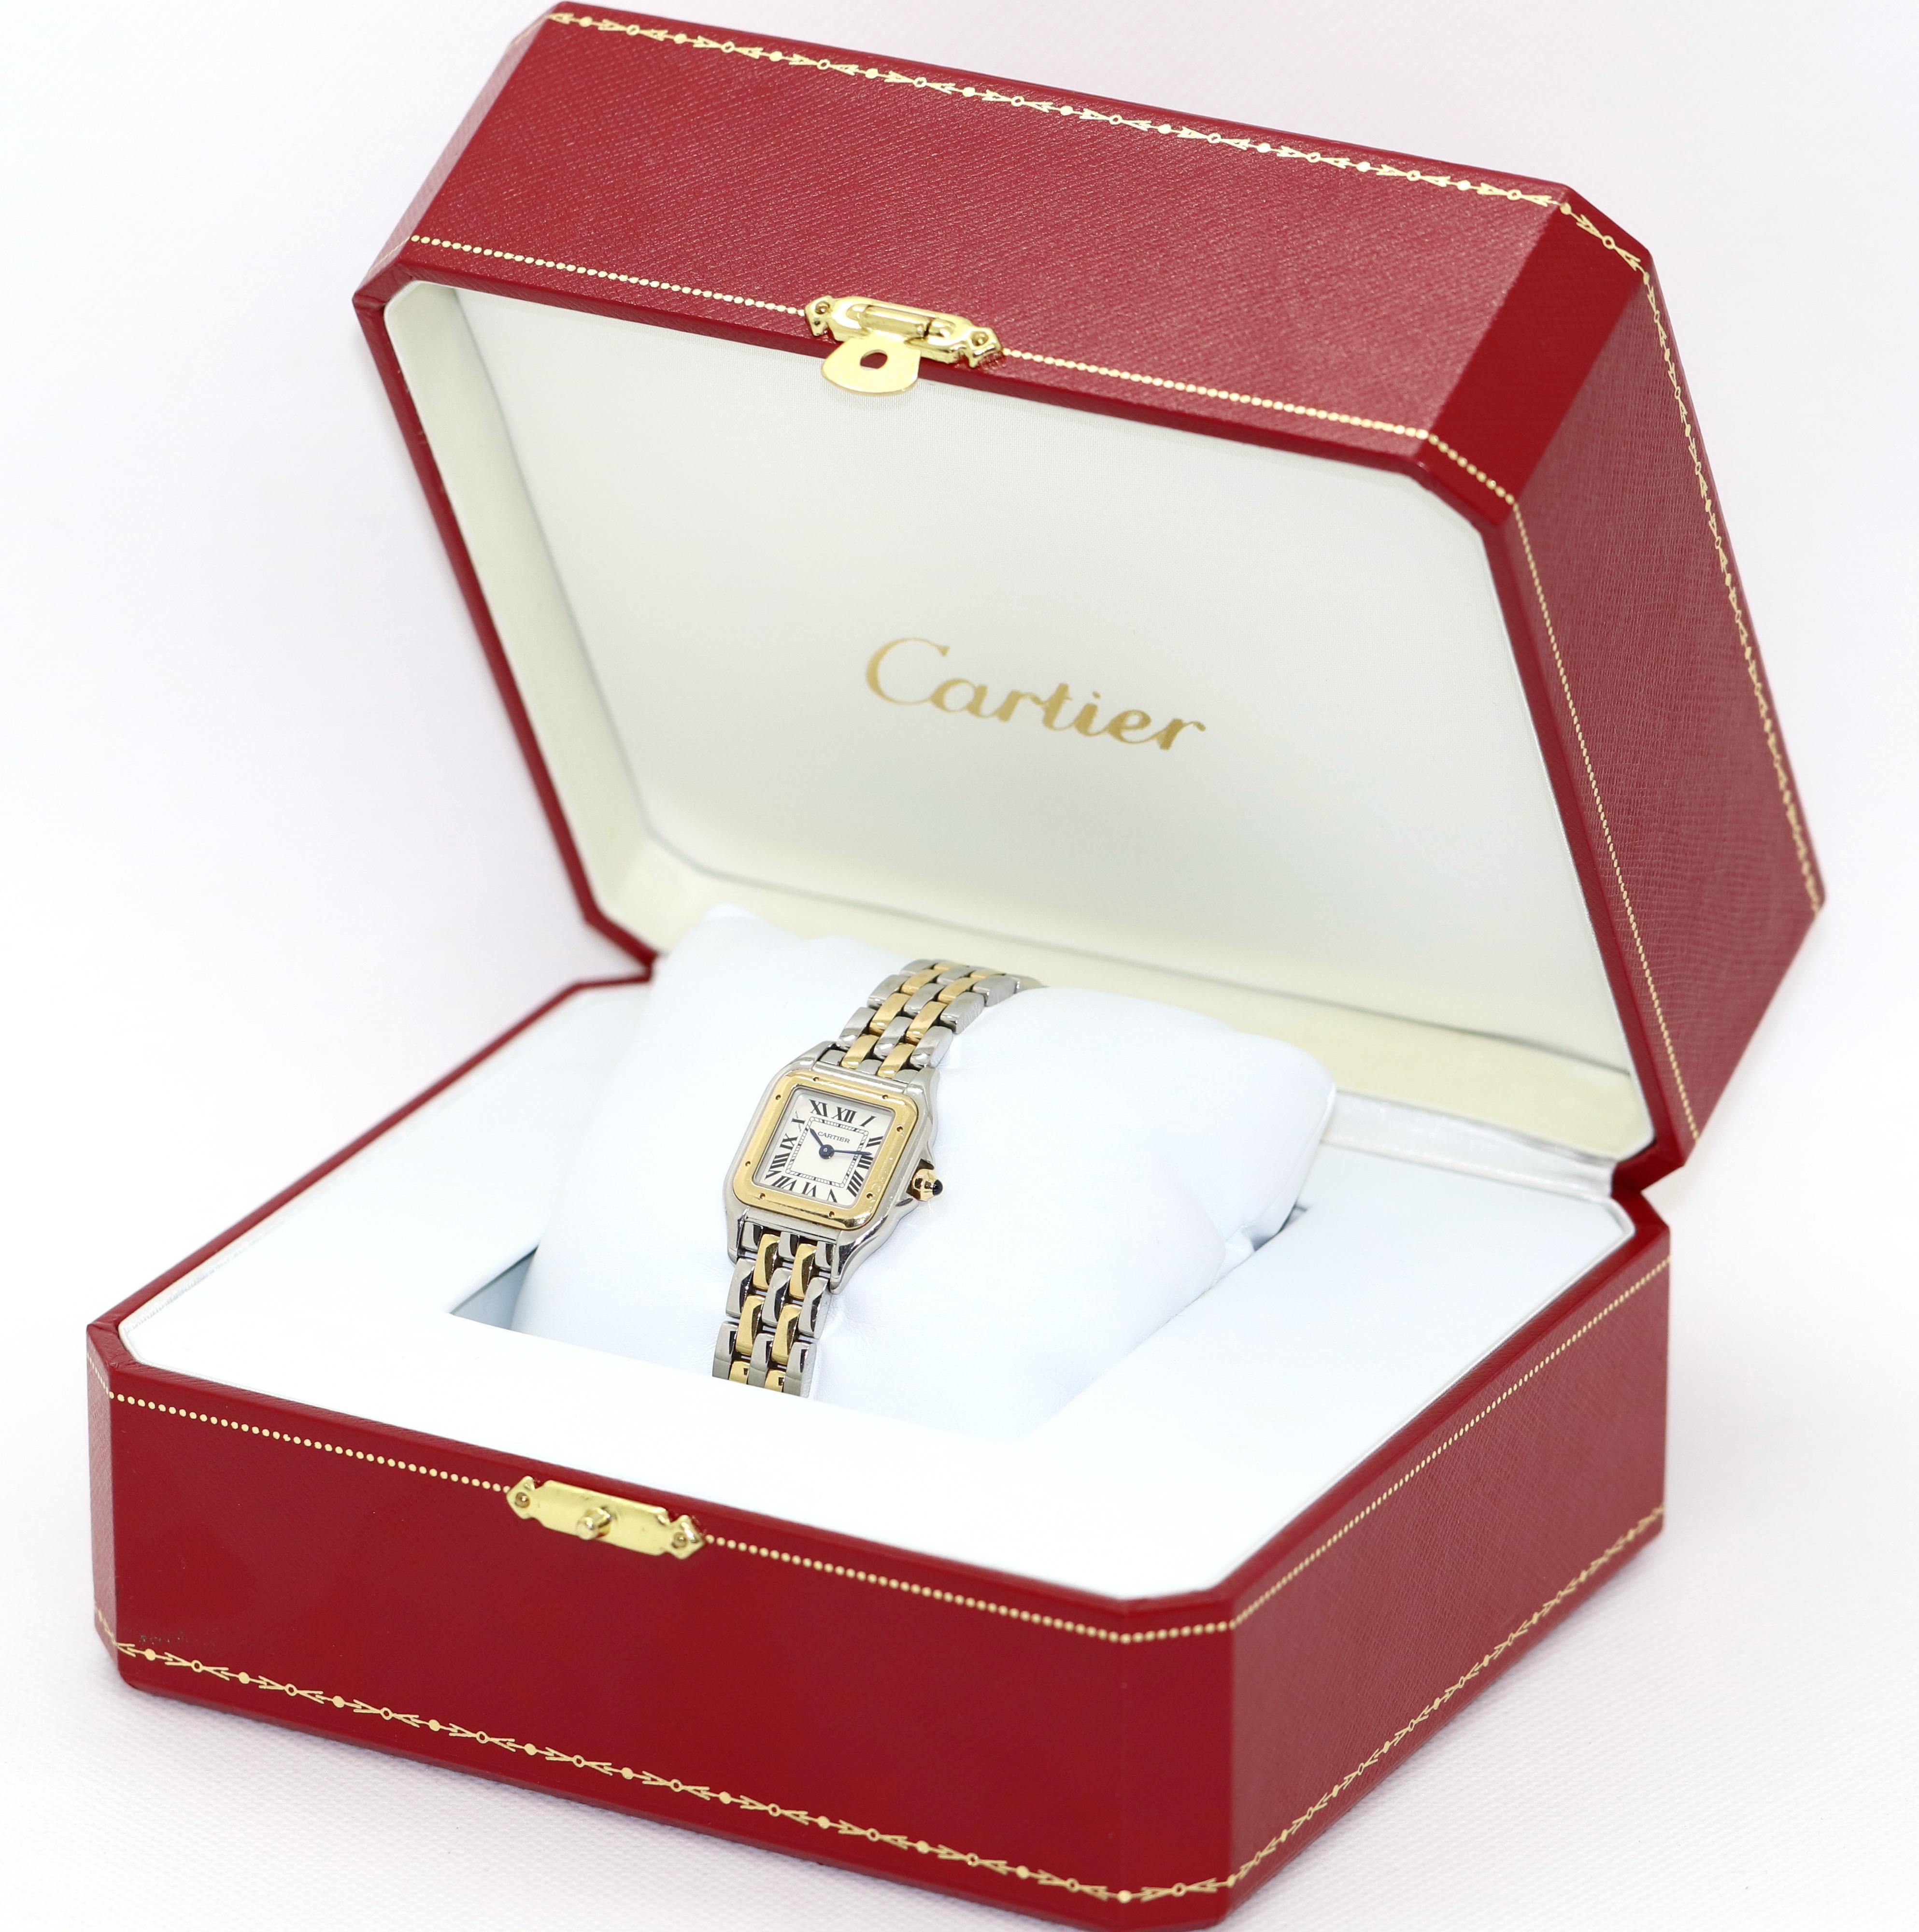 Cartier Panthere Ladies Wrist Watch New Model 18 Karat Gold and Stainless Steel 4